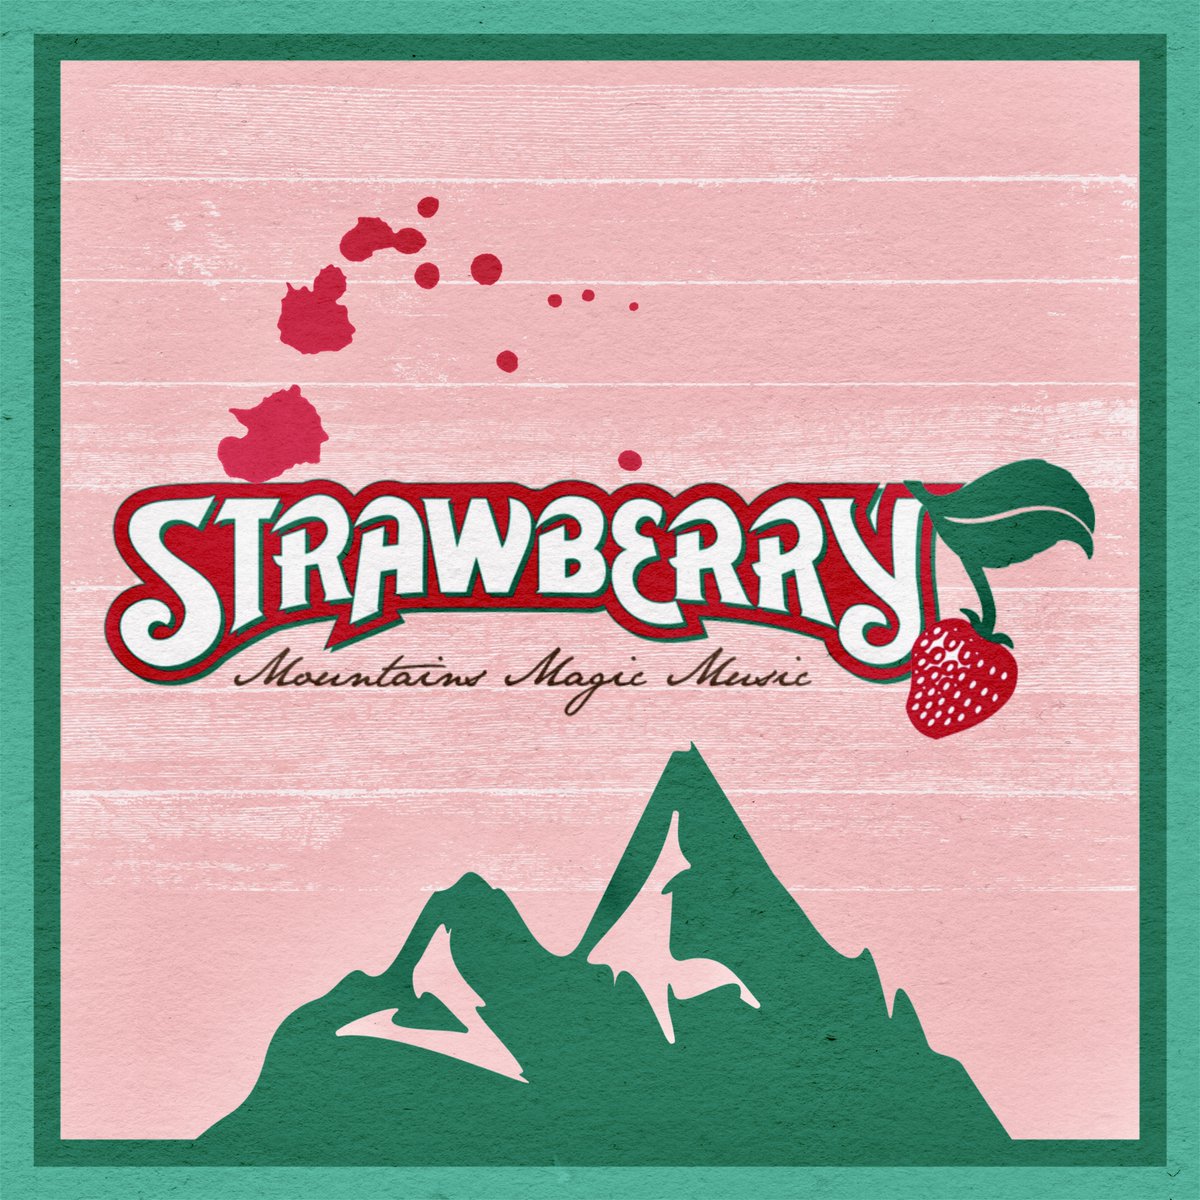 🍓The Strawberry Music Festival starts 🌟today🌟 at the Nevada County Fairgrounds in Grass Valley! Tune in to KVMR's LIVE @berryfest broadcast @ 89.5FM or stream @ KVMR.org 🍓 Details 👇 conta.cc/3MEaXEK 🍓 Festival Lineup 👇 kvmr.org/show/strawberr…